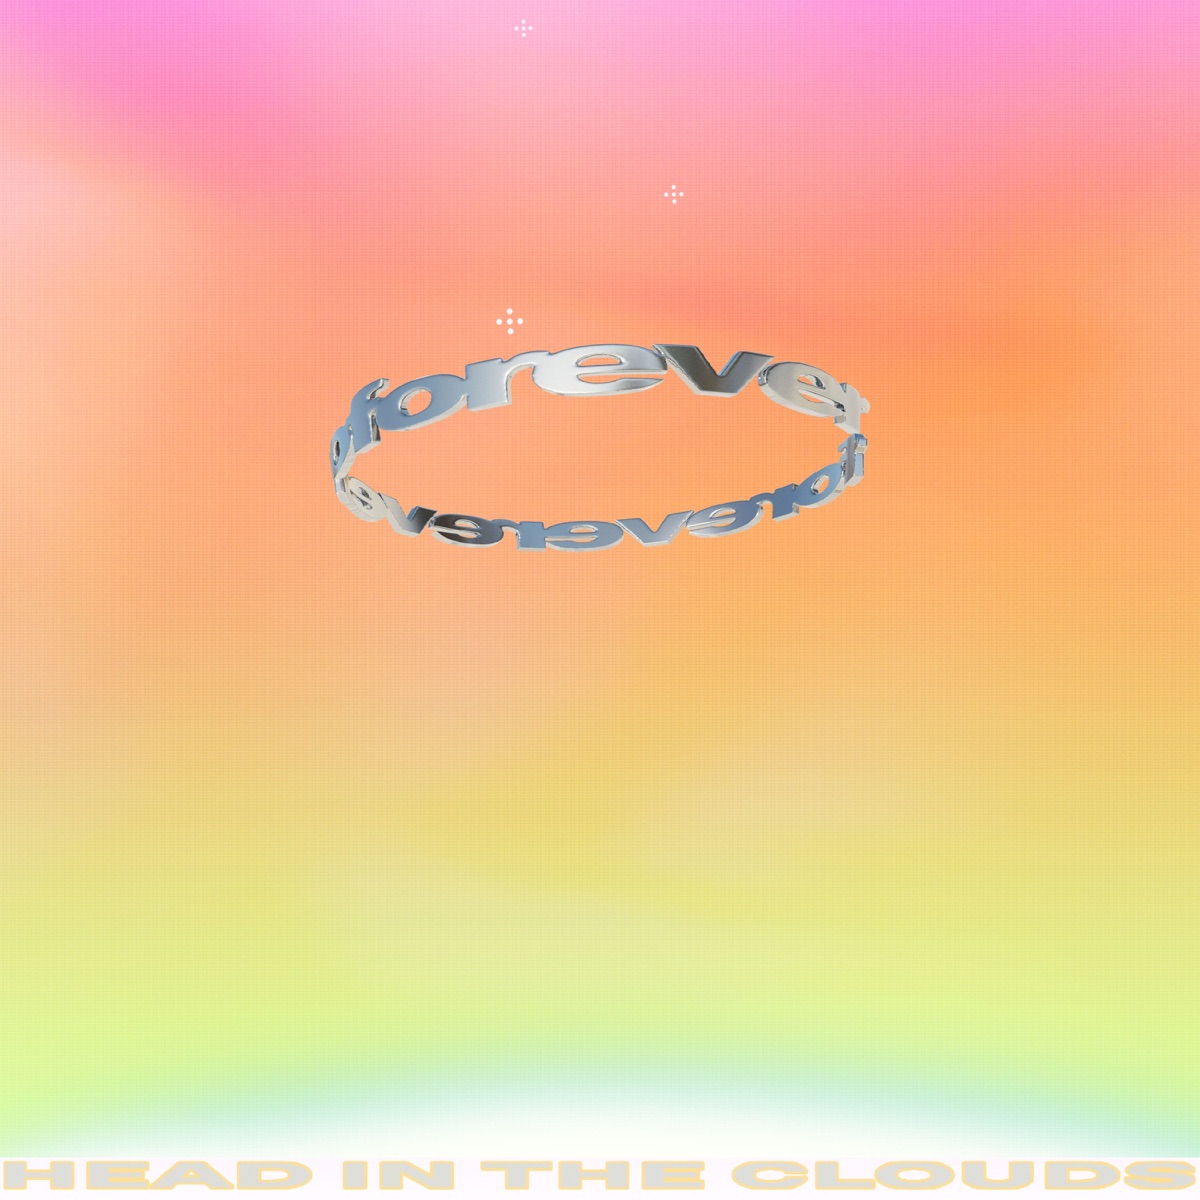 Cover art for『88rising, HIKARU UTADA, Warren Hue - T』from the release『Head In The Clouds Forever